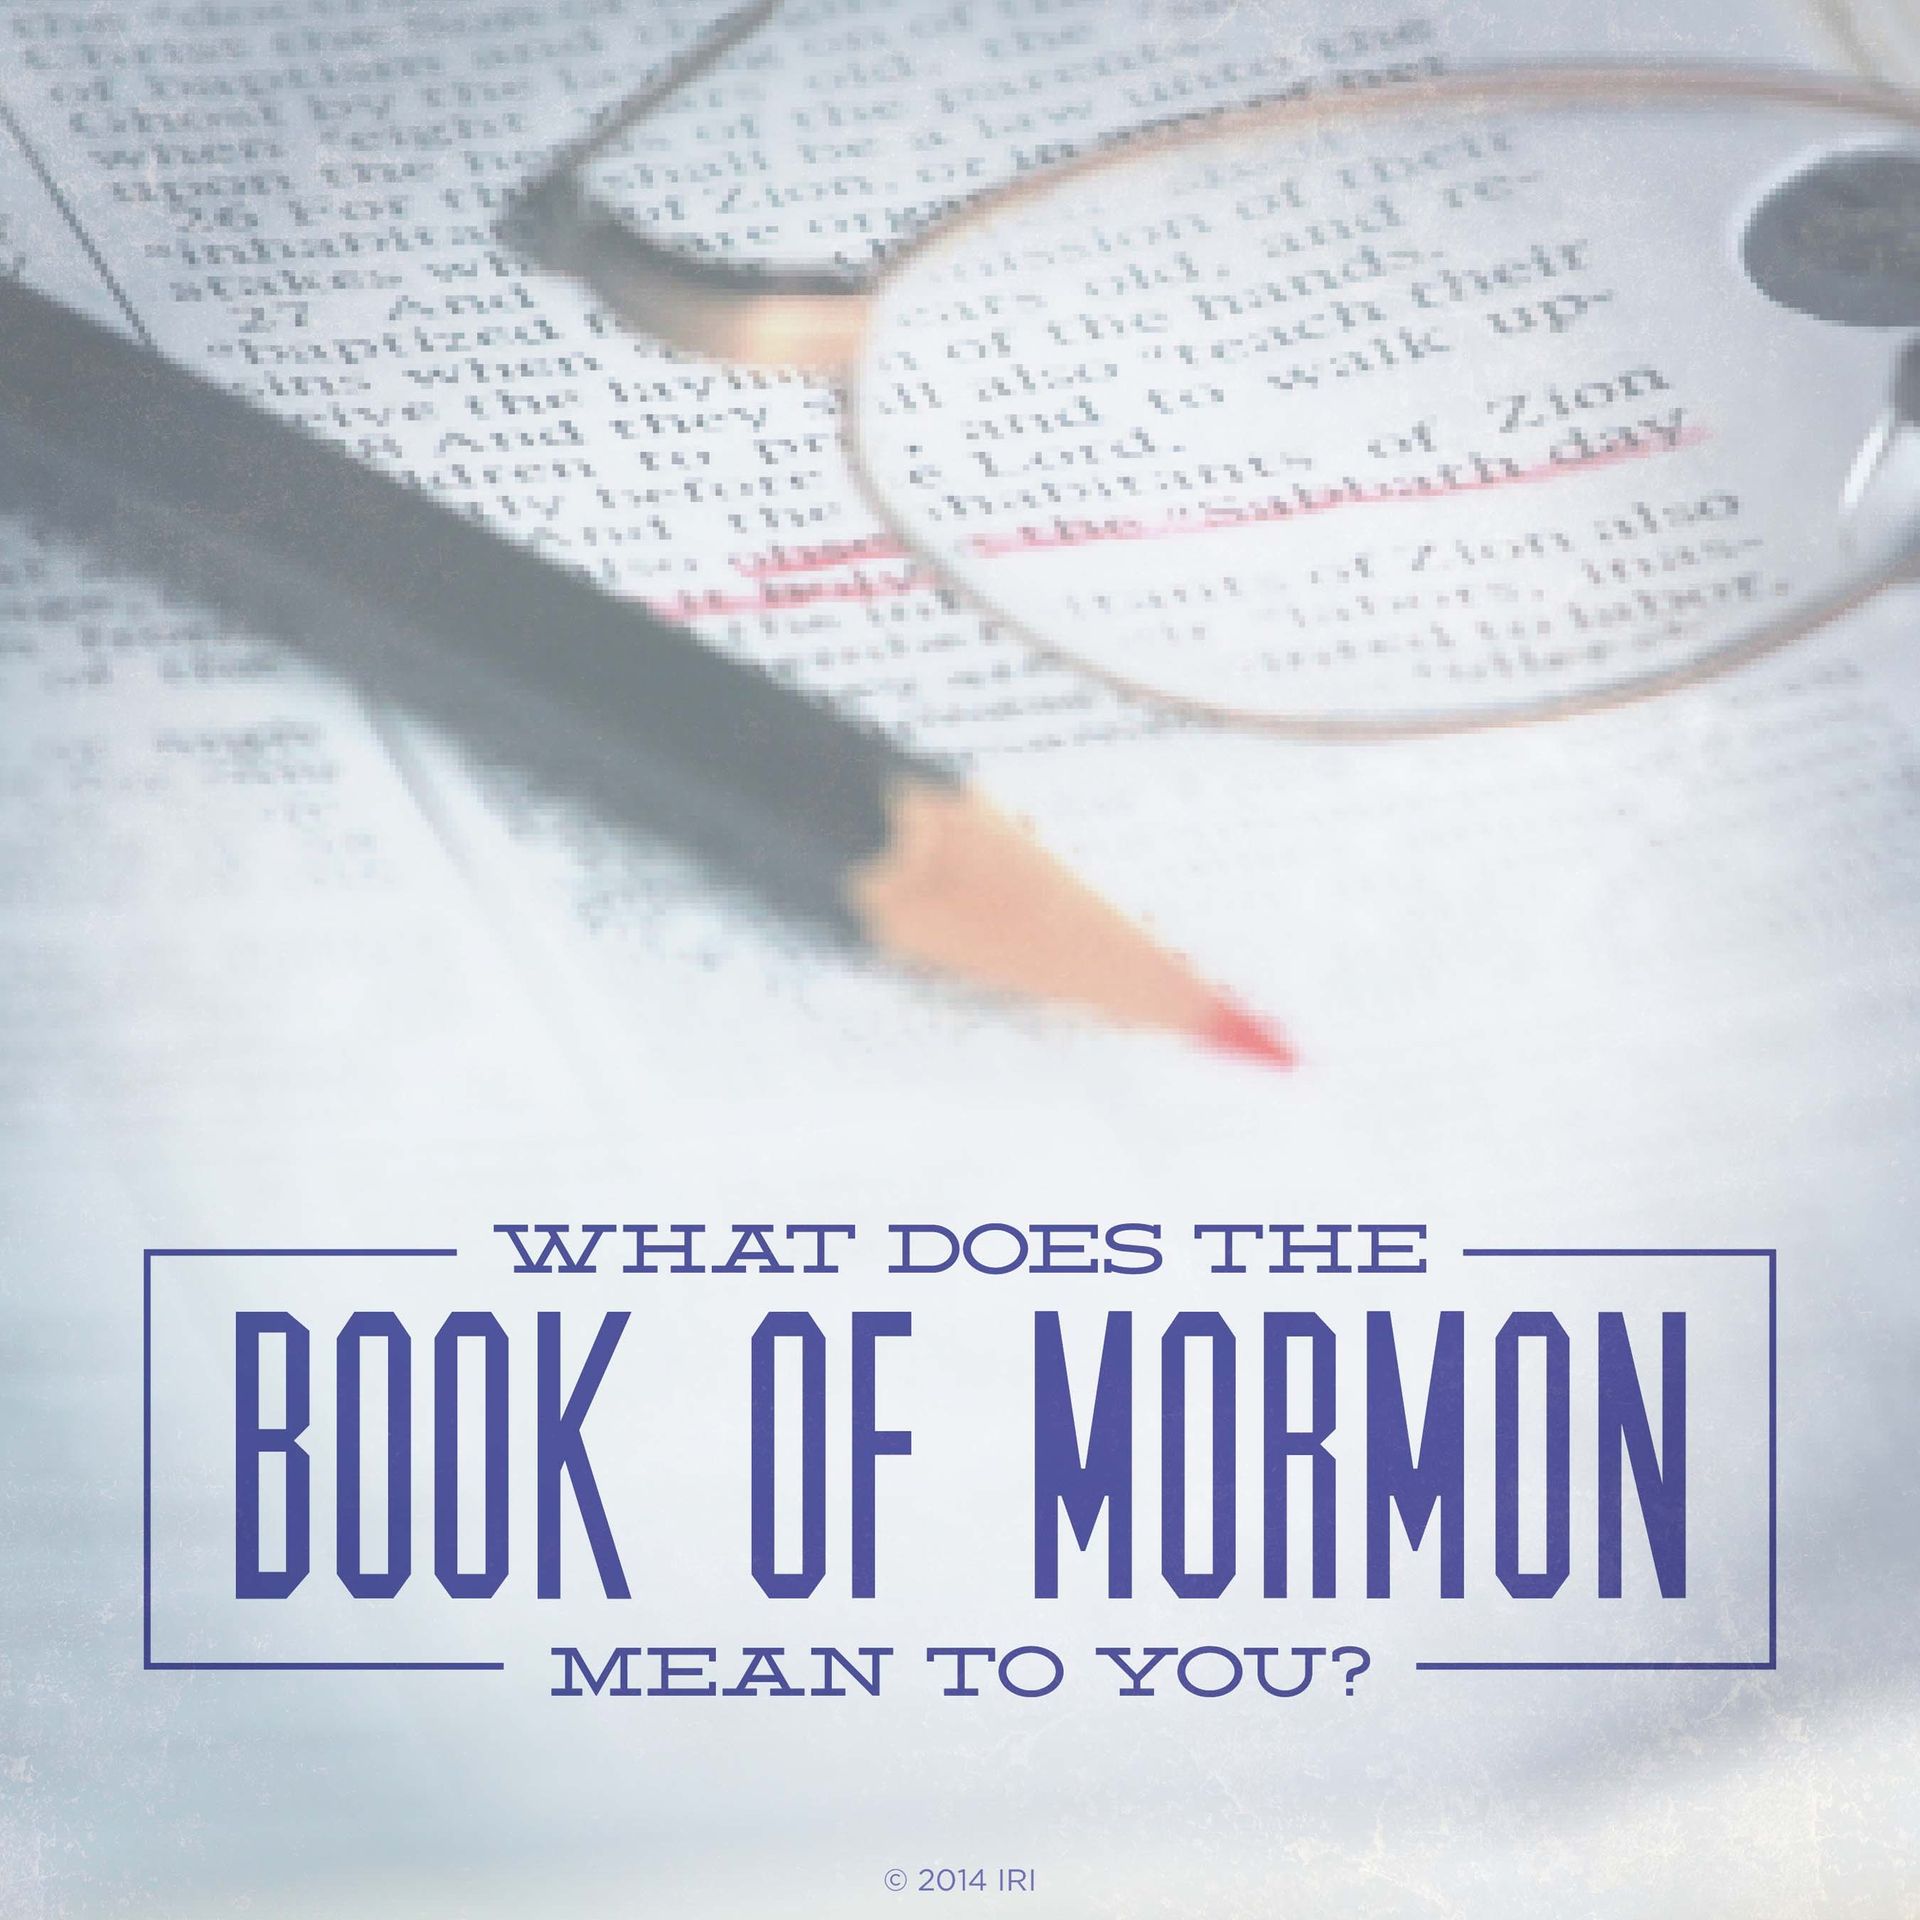 What does the Book of Mormon mean to you?